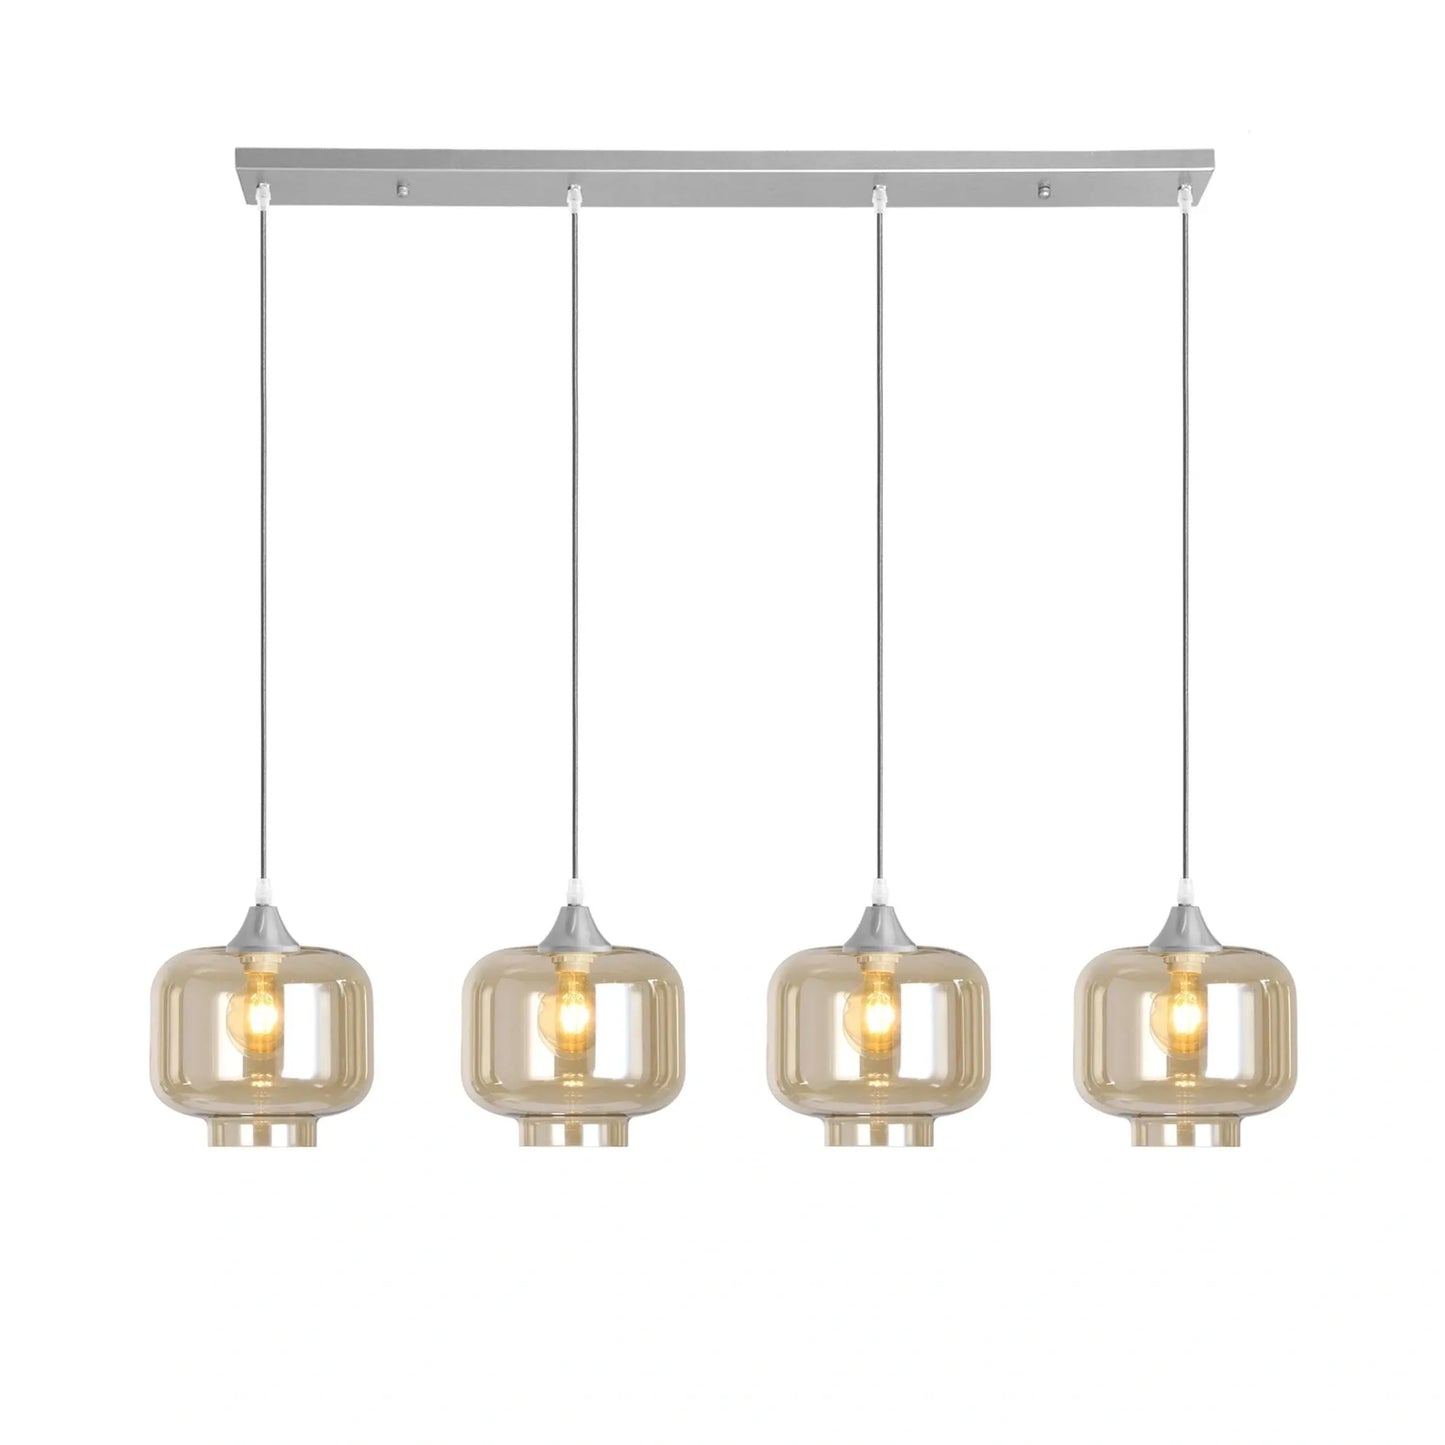 Murano 4 Light Silver Bar with 4 Round Glass shades